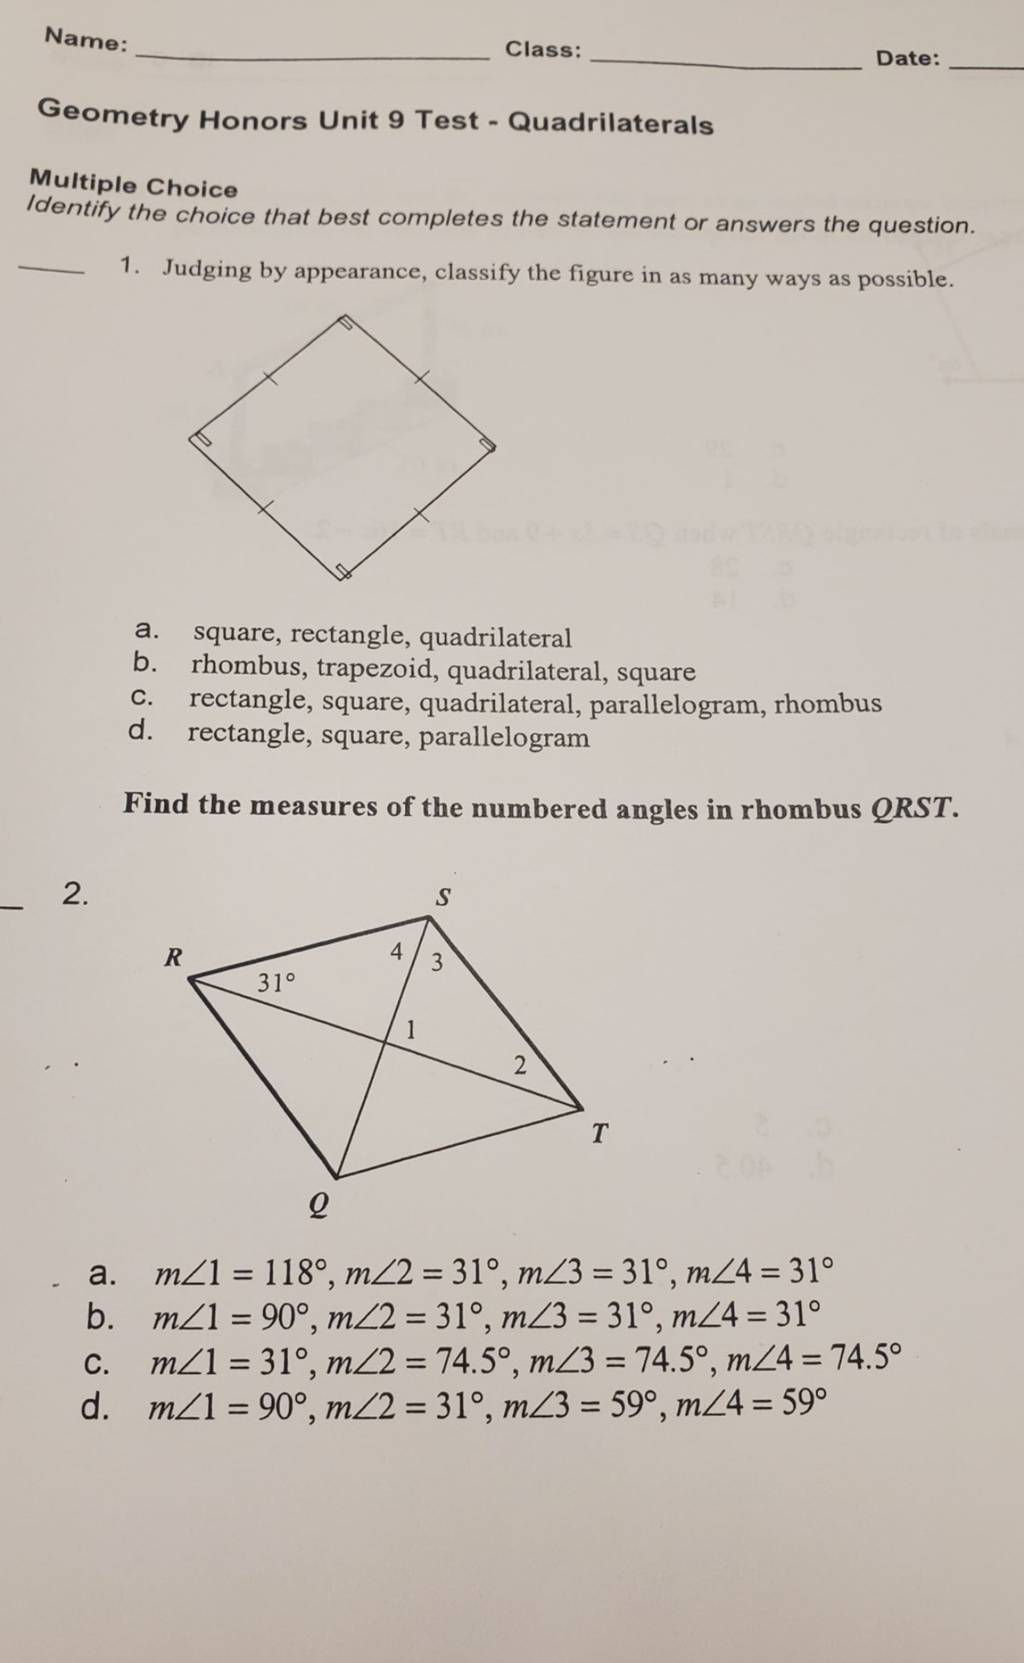 Find the measures of the numbered angles in rhombus QRST. 2.